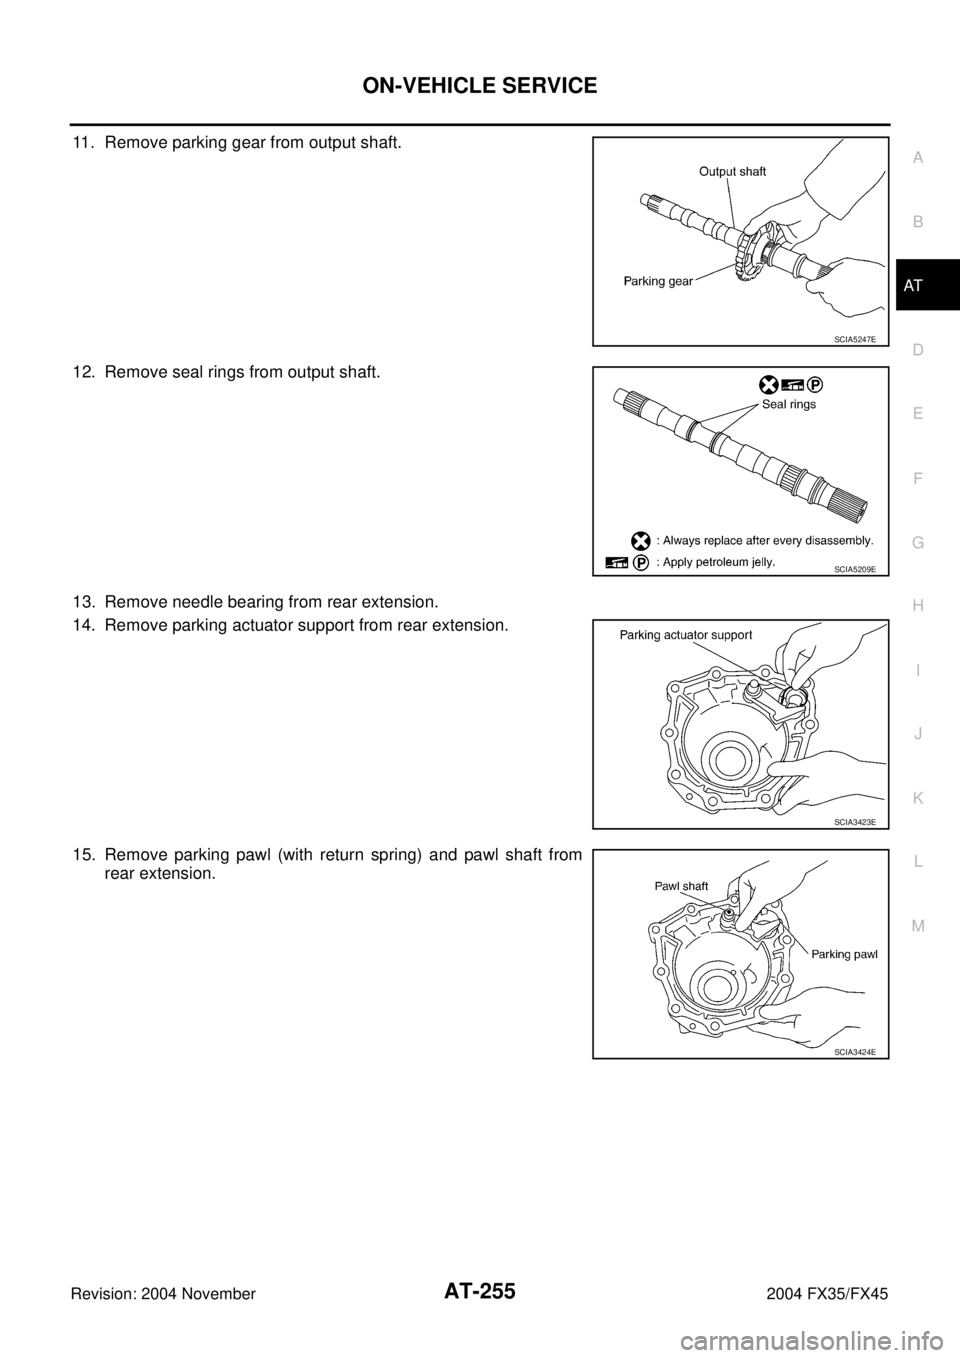 INFINITI FX35 2004  Service Manual ON-VEHICLE SERVICE
AT-255
D
E
F
G
H
I
J
K
L
MA
B
AT
Revision: 2004 November 2004 FX35/FX45
11. Remove parking gear from output shaft.
12. Remove seal rings from output shaft.
13. Remove needle bearing